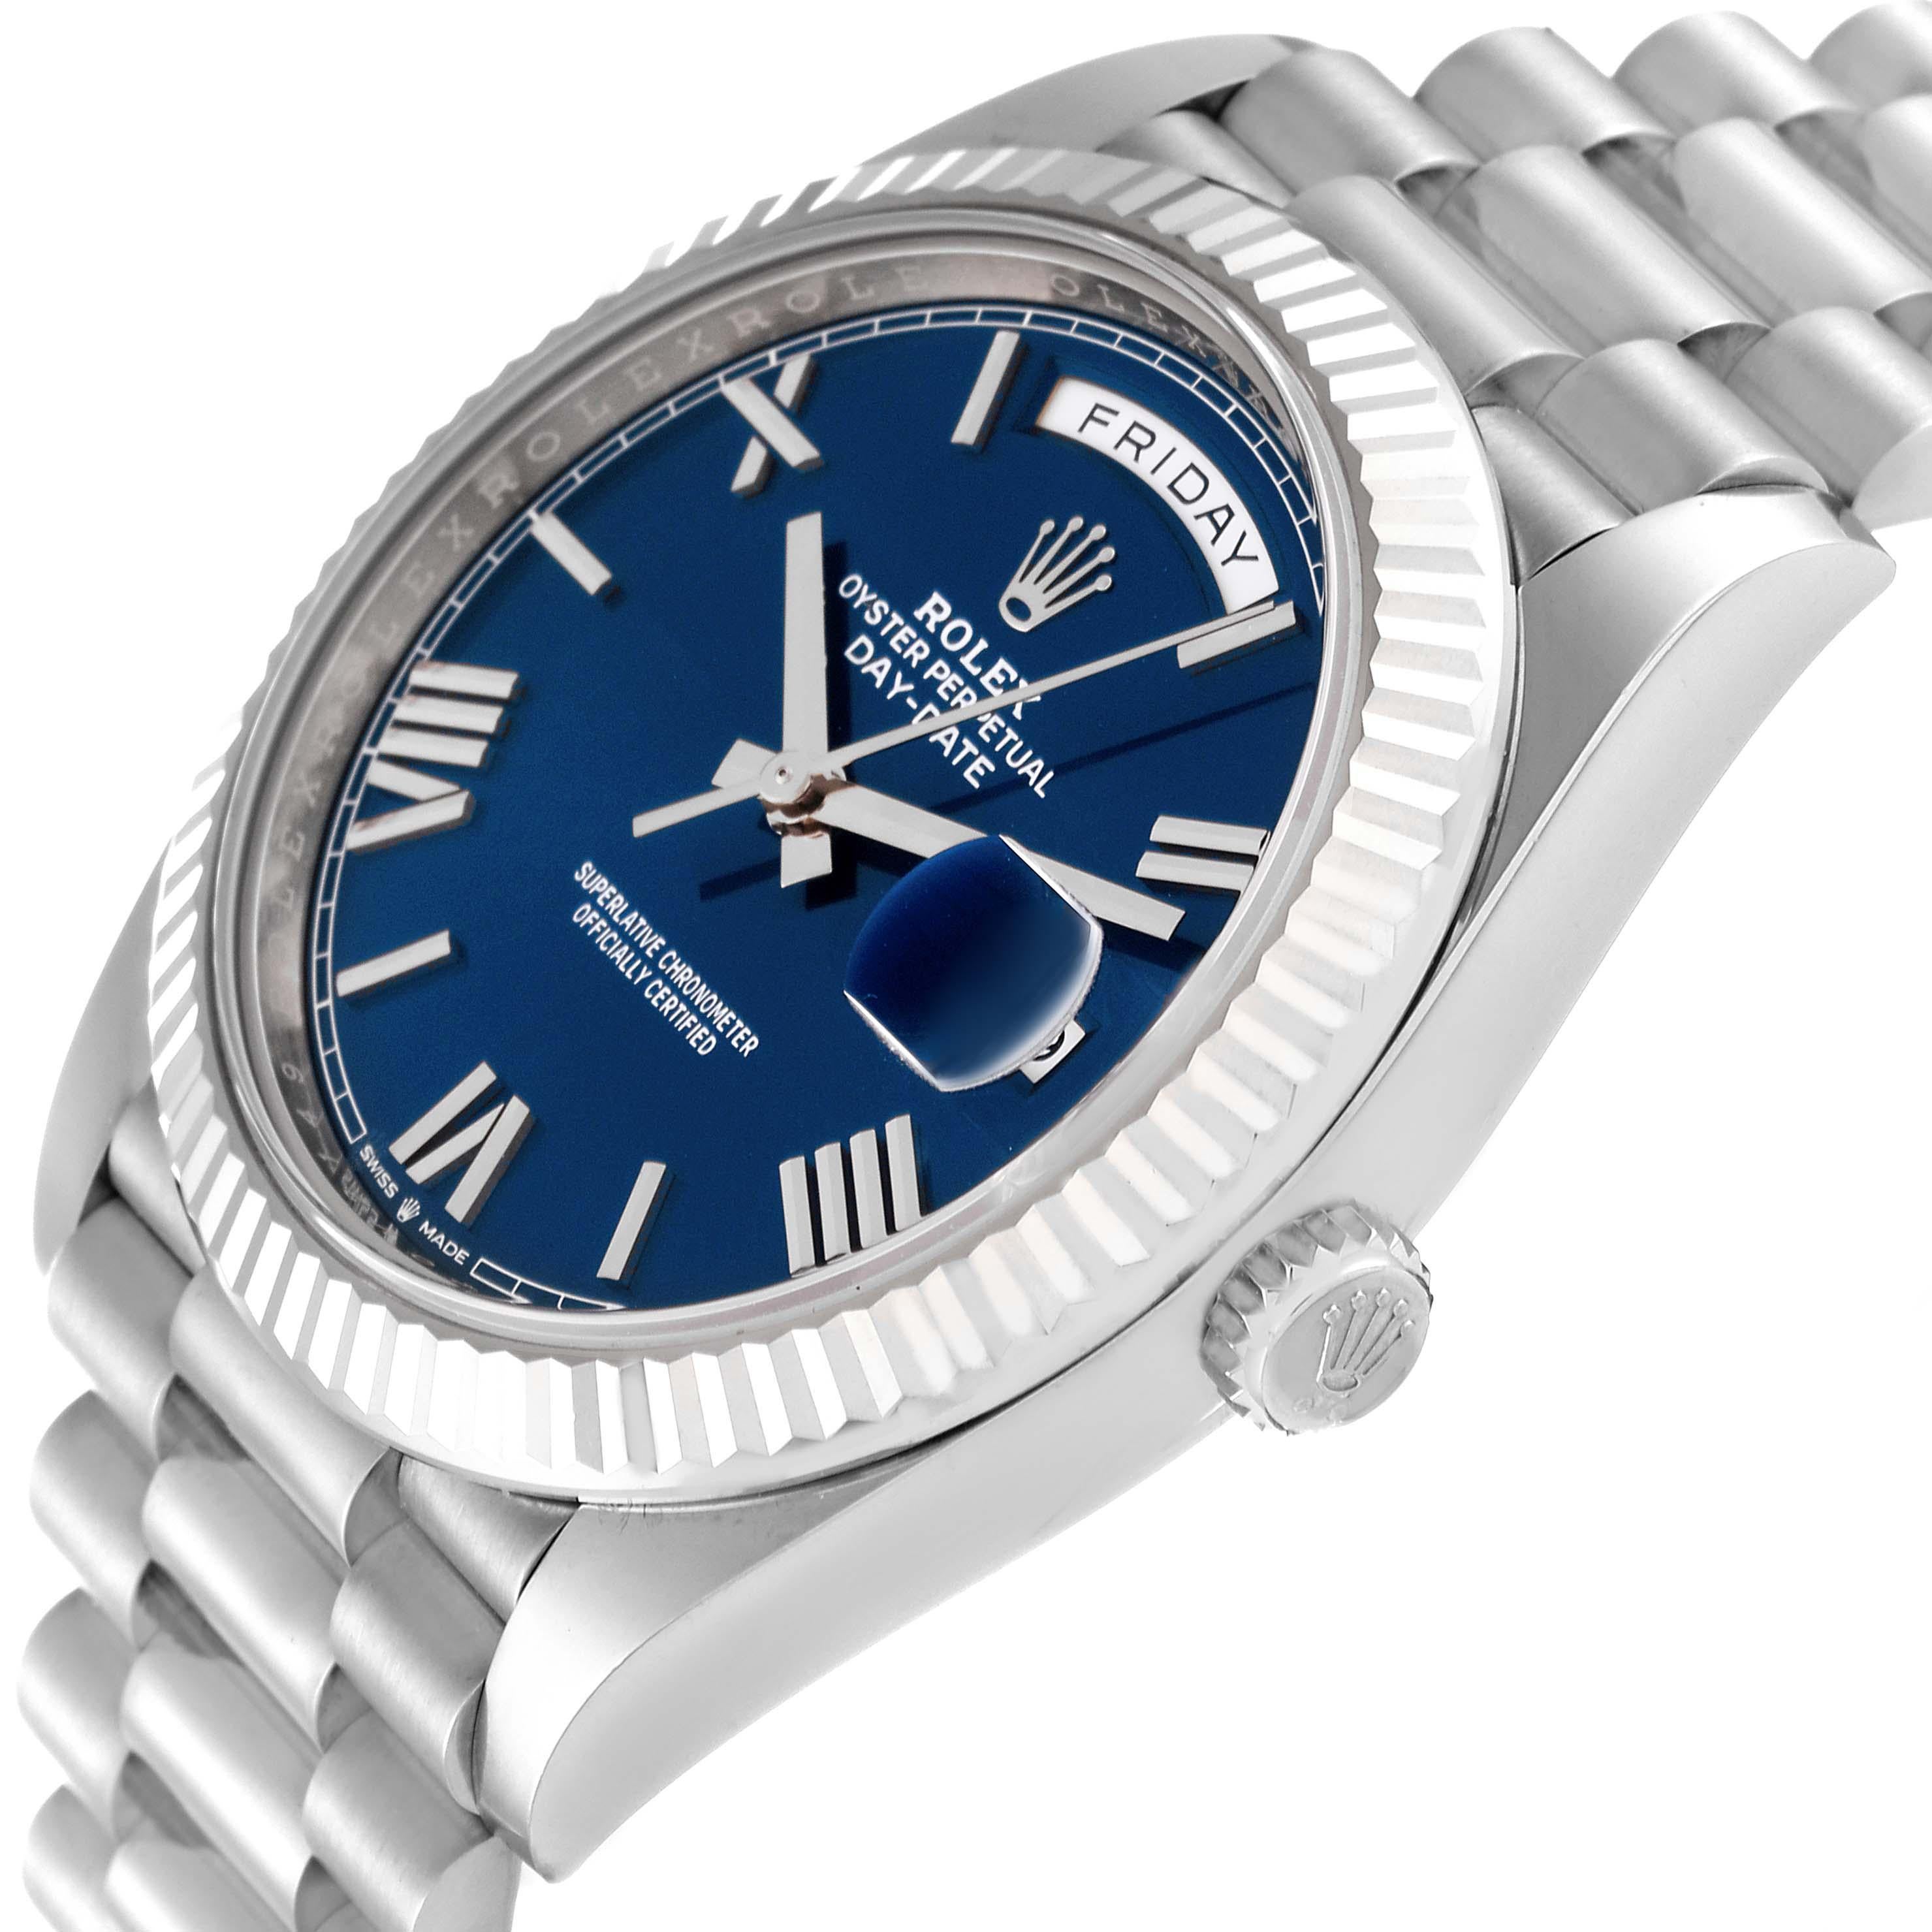 Rolex President Day-Date 40 Blue Dial White Gold Mens Watch 228239 Box Card. Officially certified chronometer self-winding movement. Double quick set function. 18K white gold oyster case 40.0 mm in diameter. Rolex logo on the crown. 18k white gold